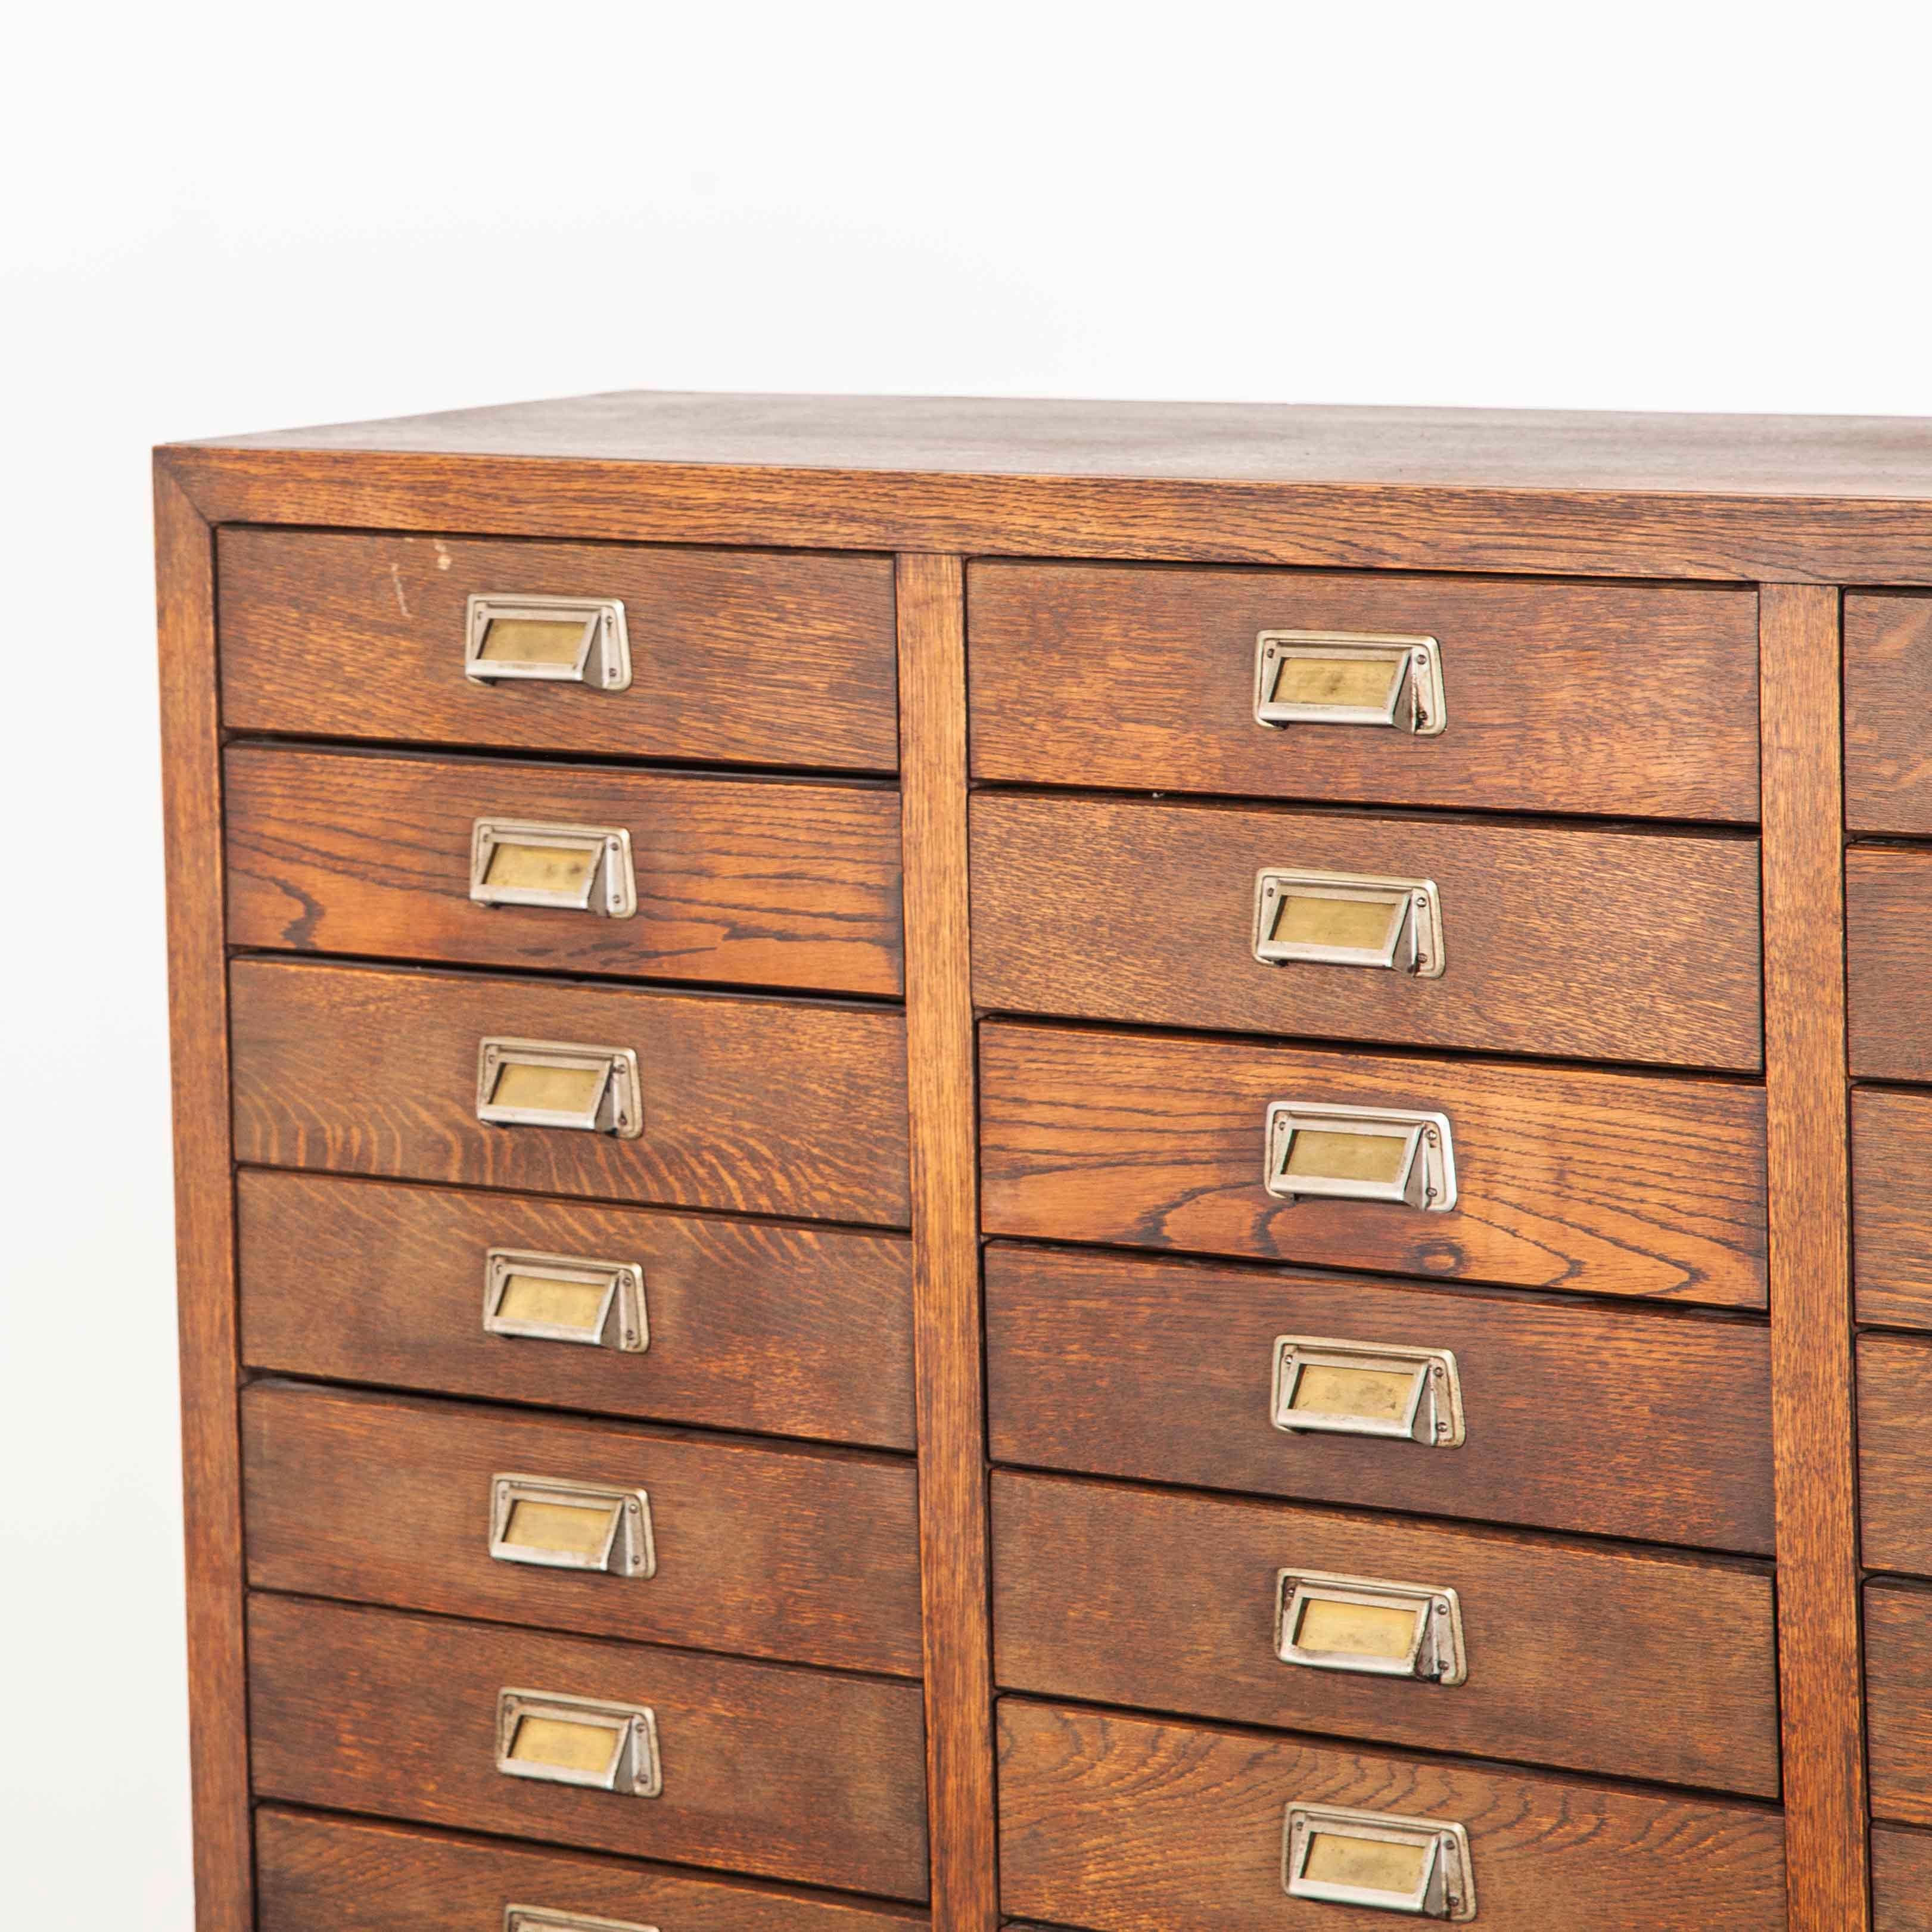 1950s oak apothecary multi drawer chest of drawers – Thirty nine drawers
1950s oak apothecary multi drawer chest of drawers – thirty nine
drawers. The chest of drawers is in incredible condition with a complete set of original handles and a rich